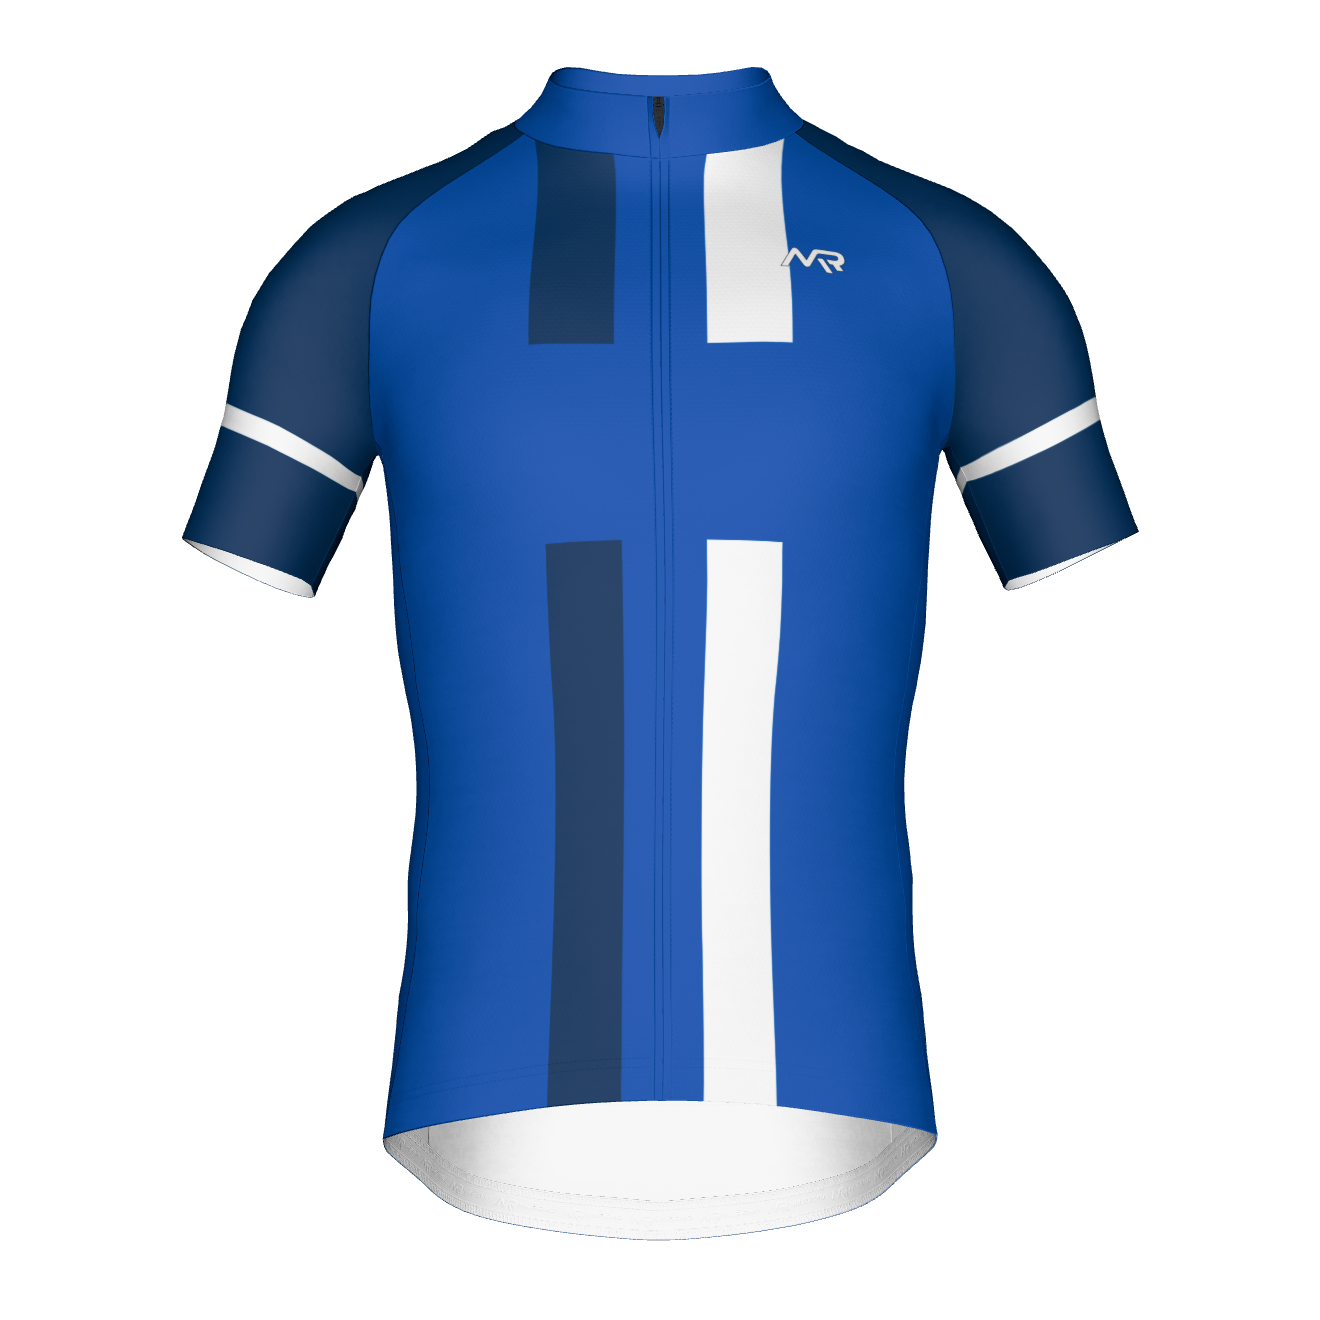 Endurance Cycling jersey s/s form fit clean cut 